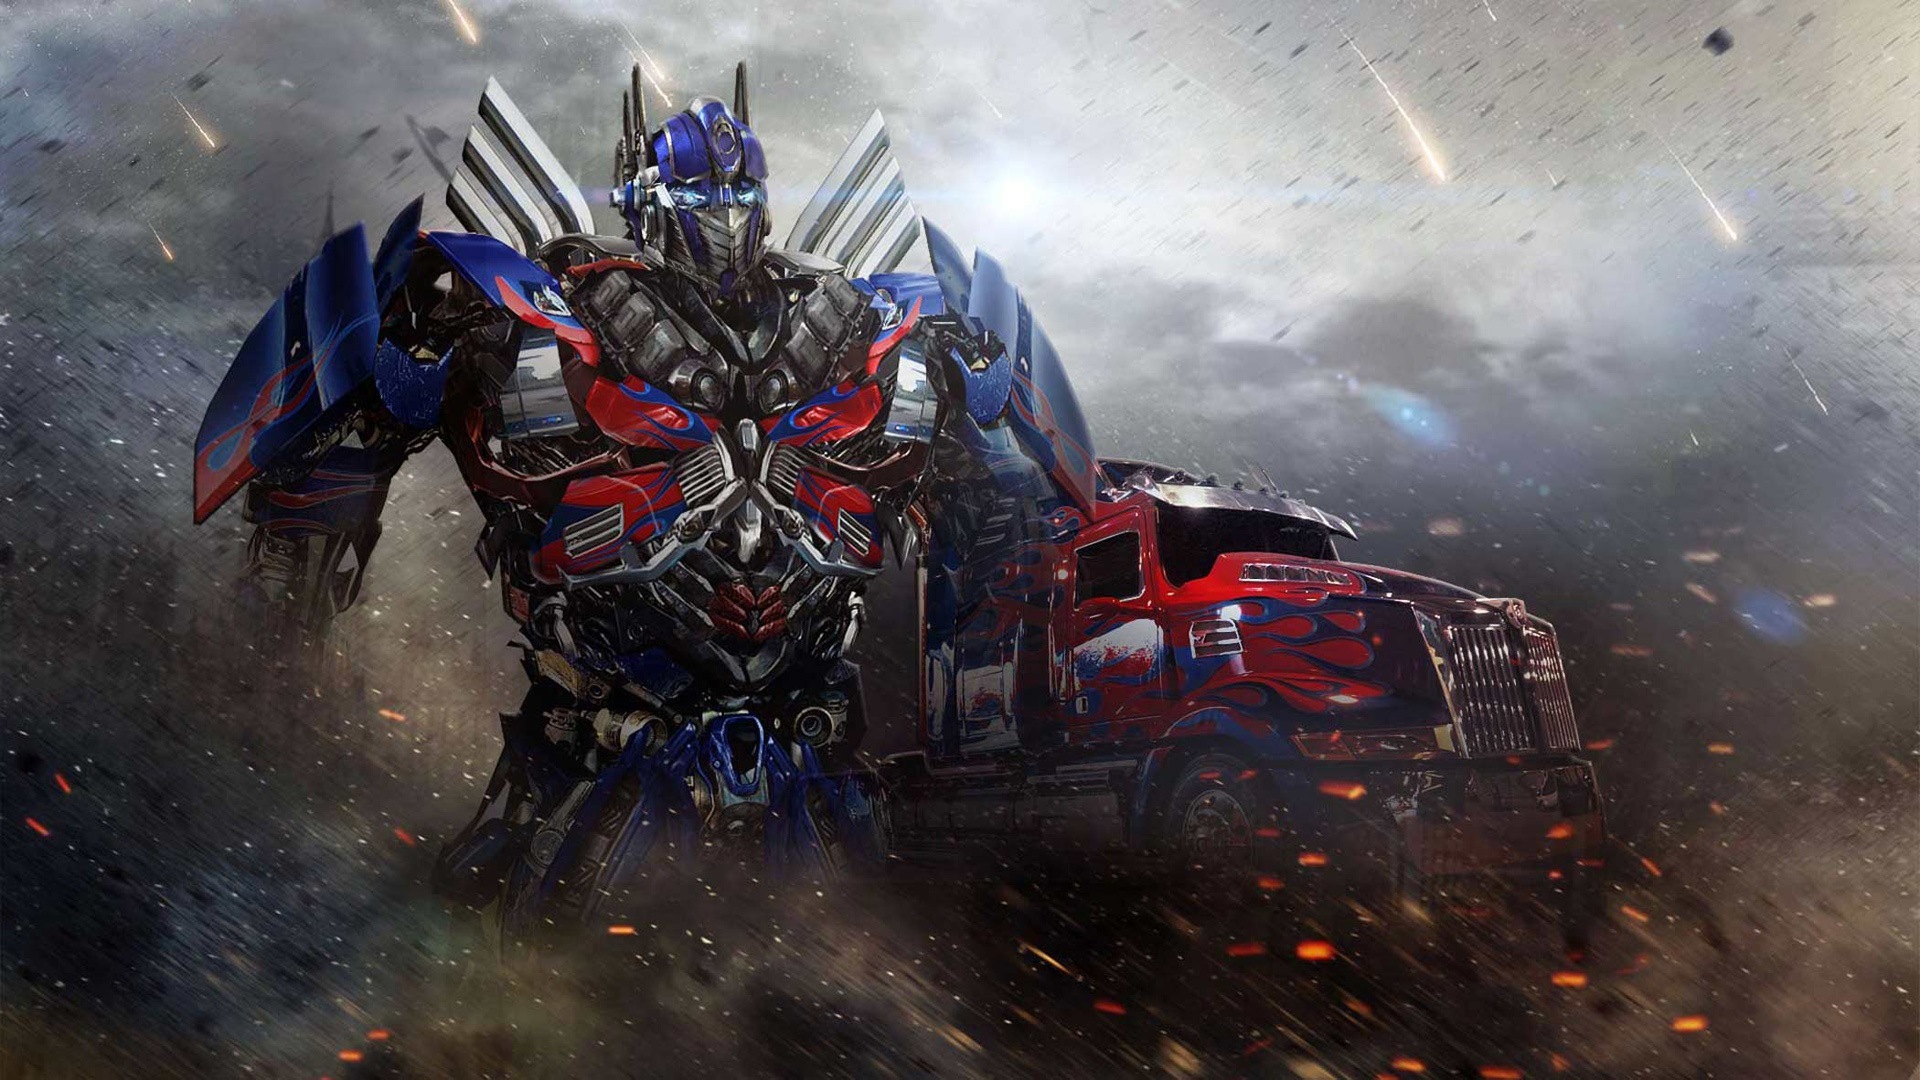 2014 Transformers: Age of Extinction HD tapety #6 - 1920x1080